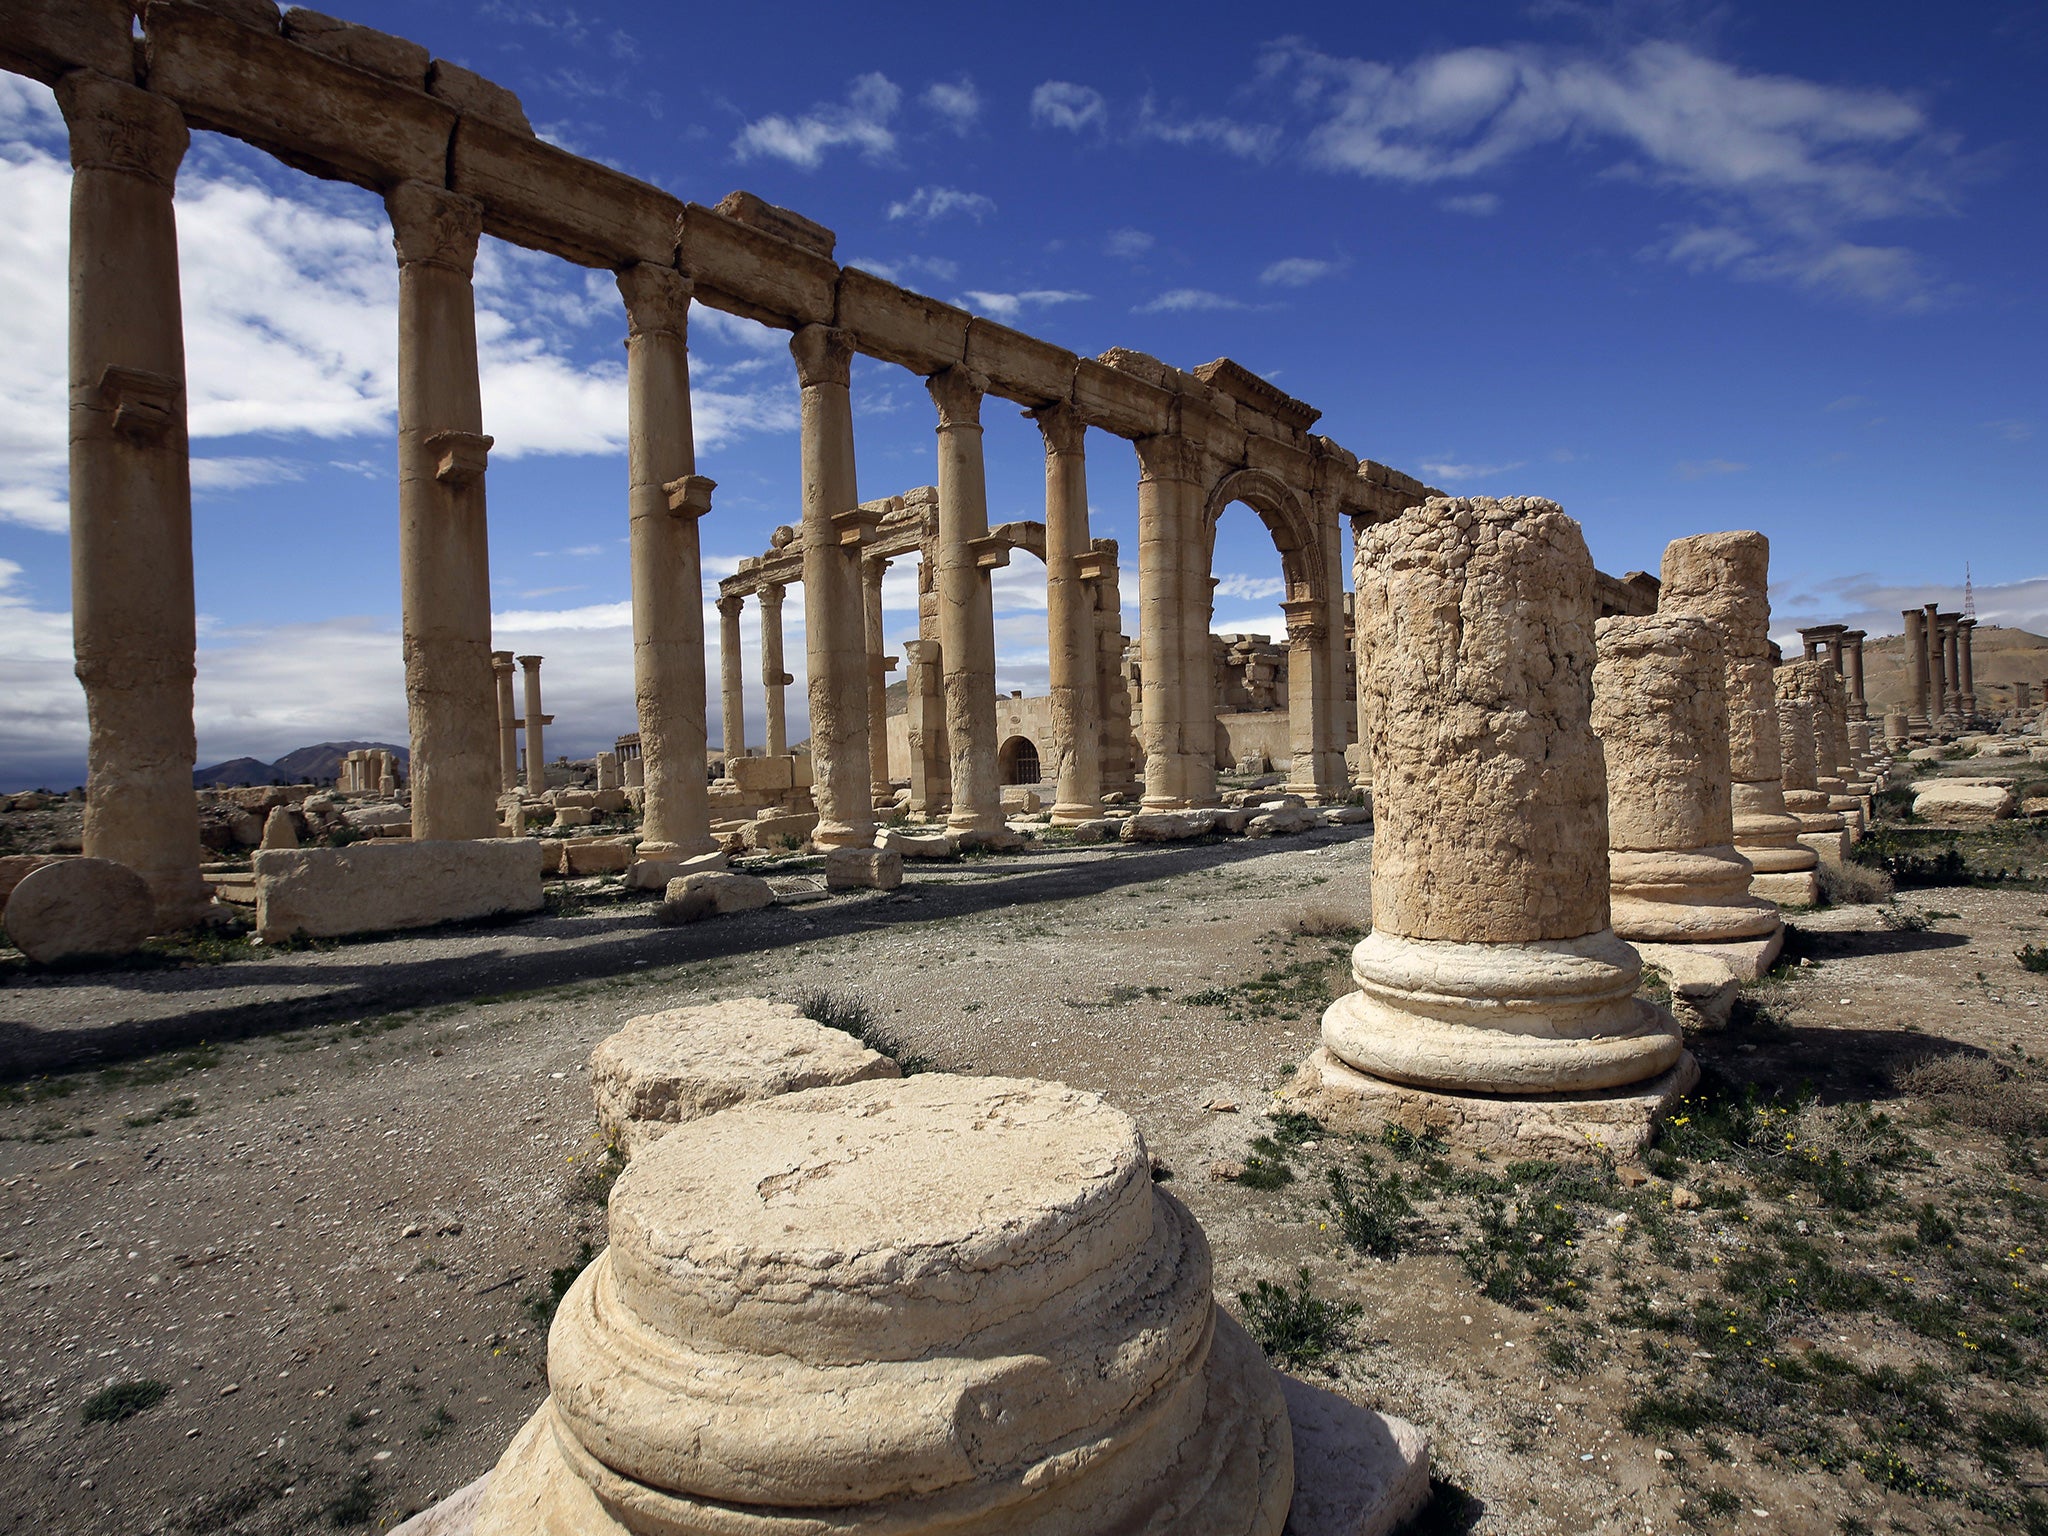 The ancient Syrian city of Palmya, where a temple has been destroyed